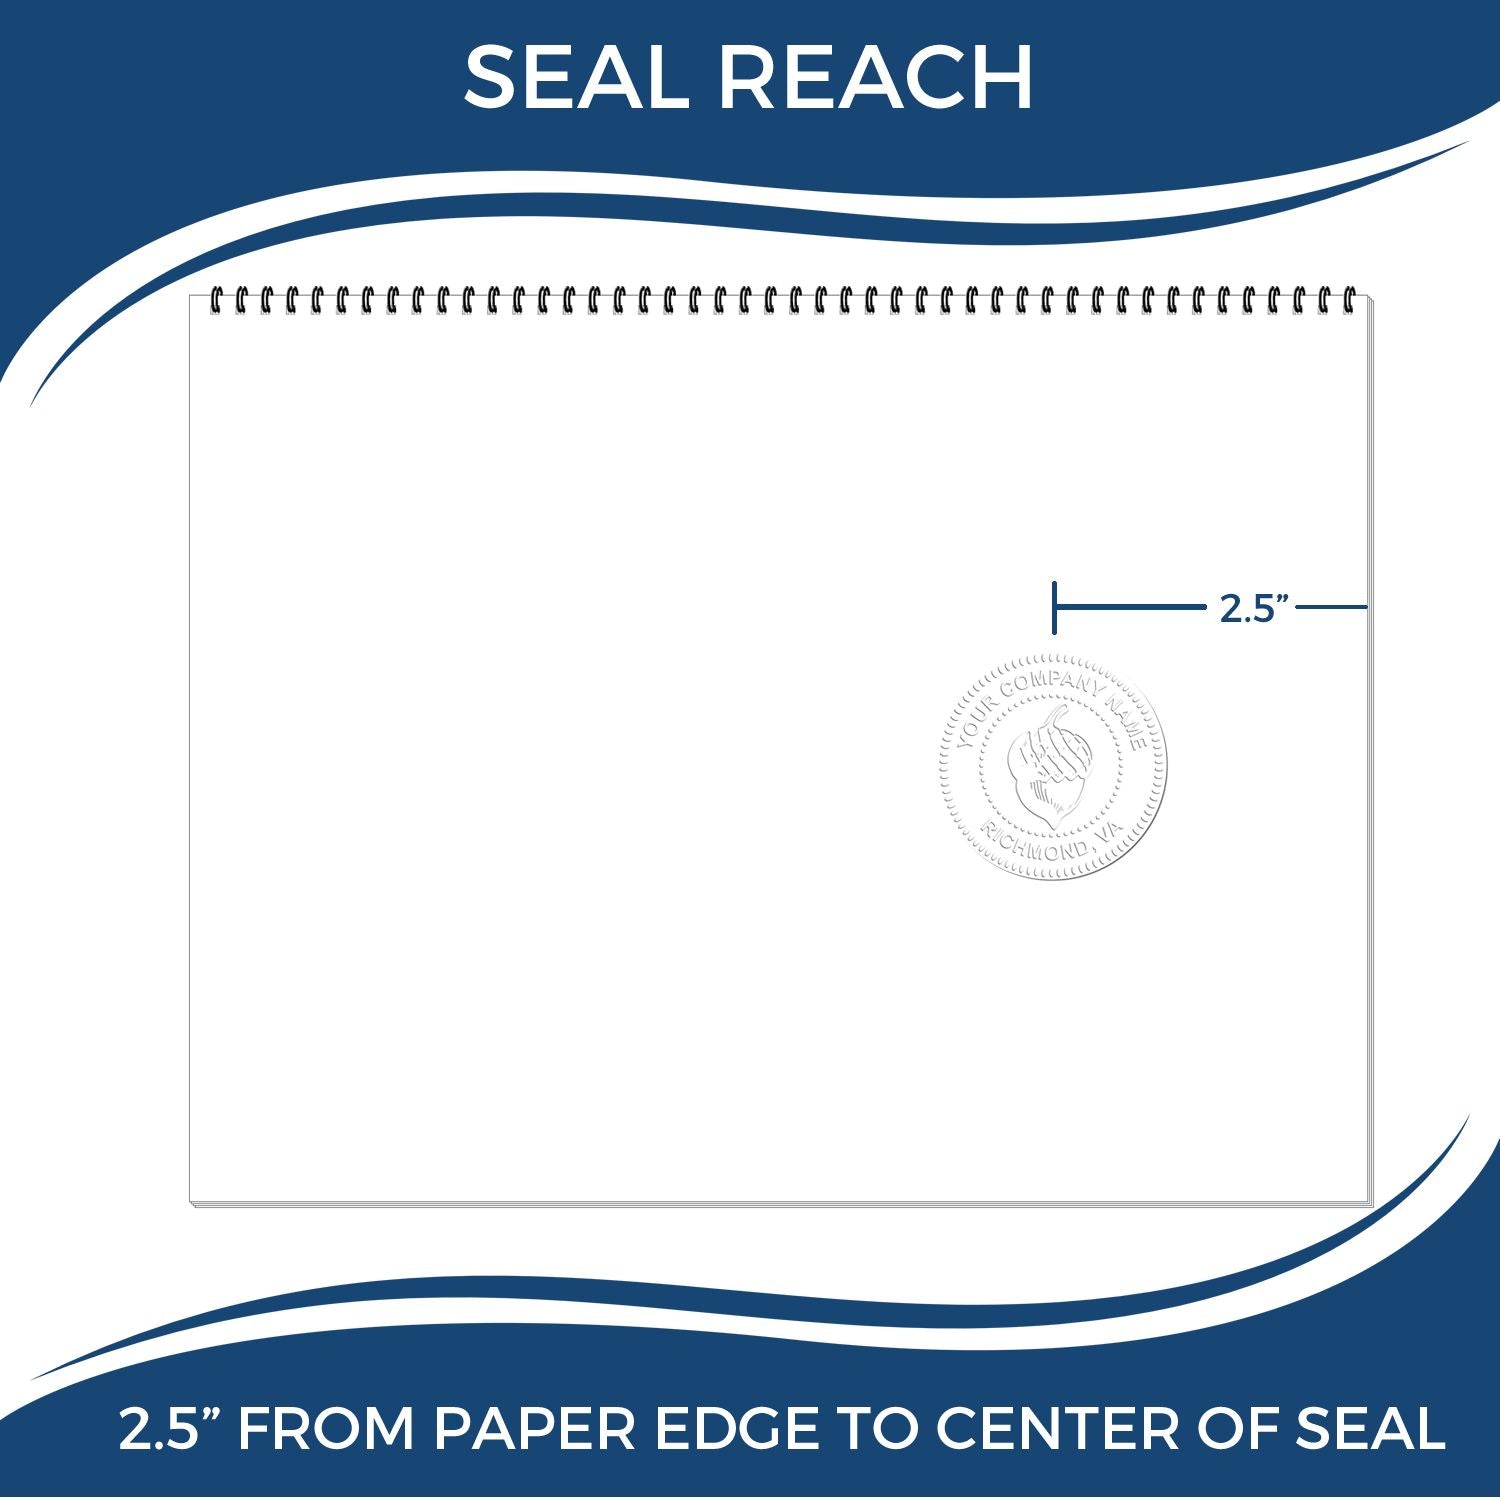 An infographic showing the seal reach which is represented by a ruler and a miniature seal image of the Long Reach Tennessee Land Surveyor Seal